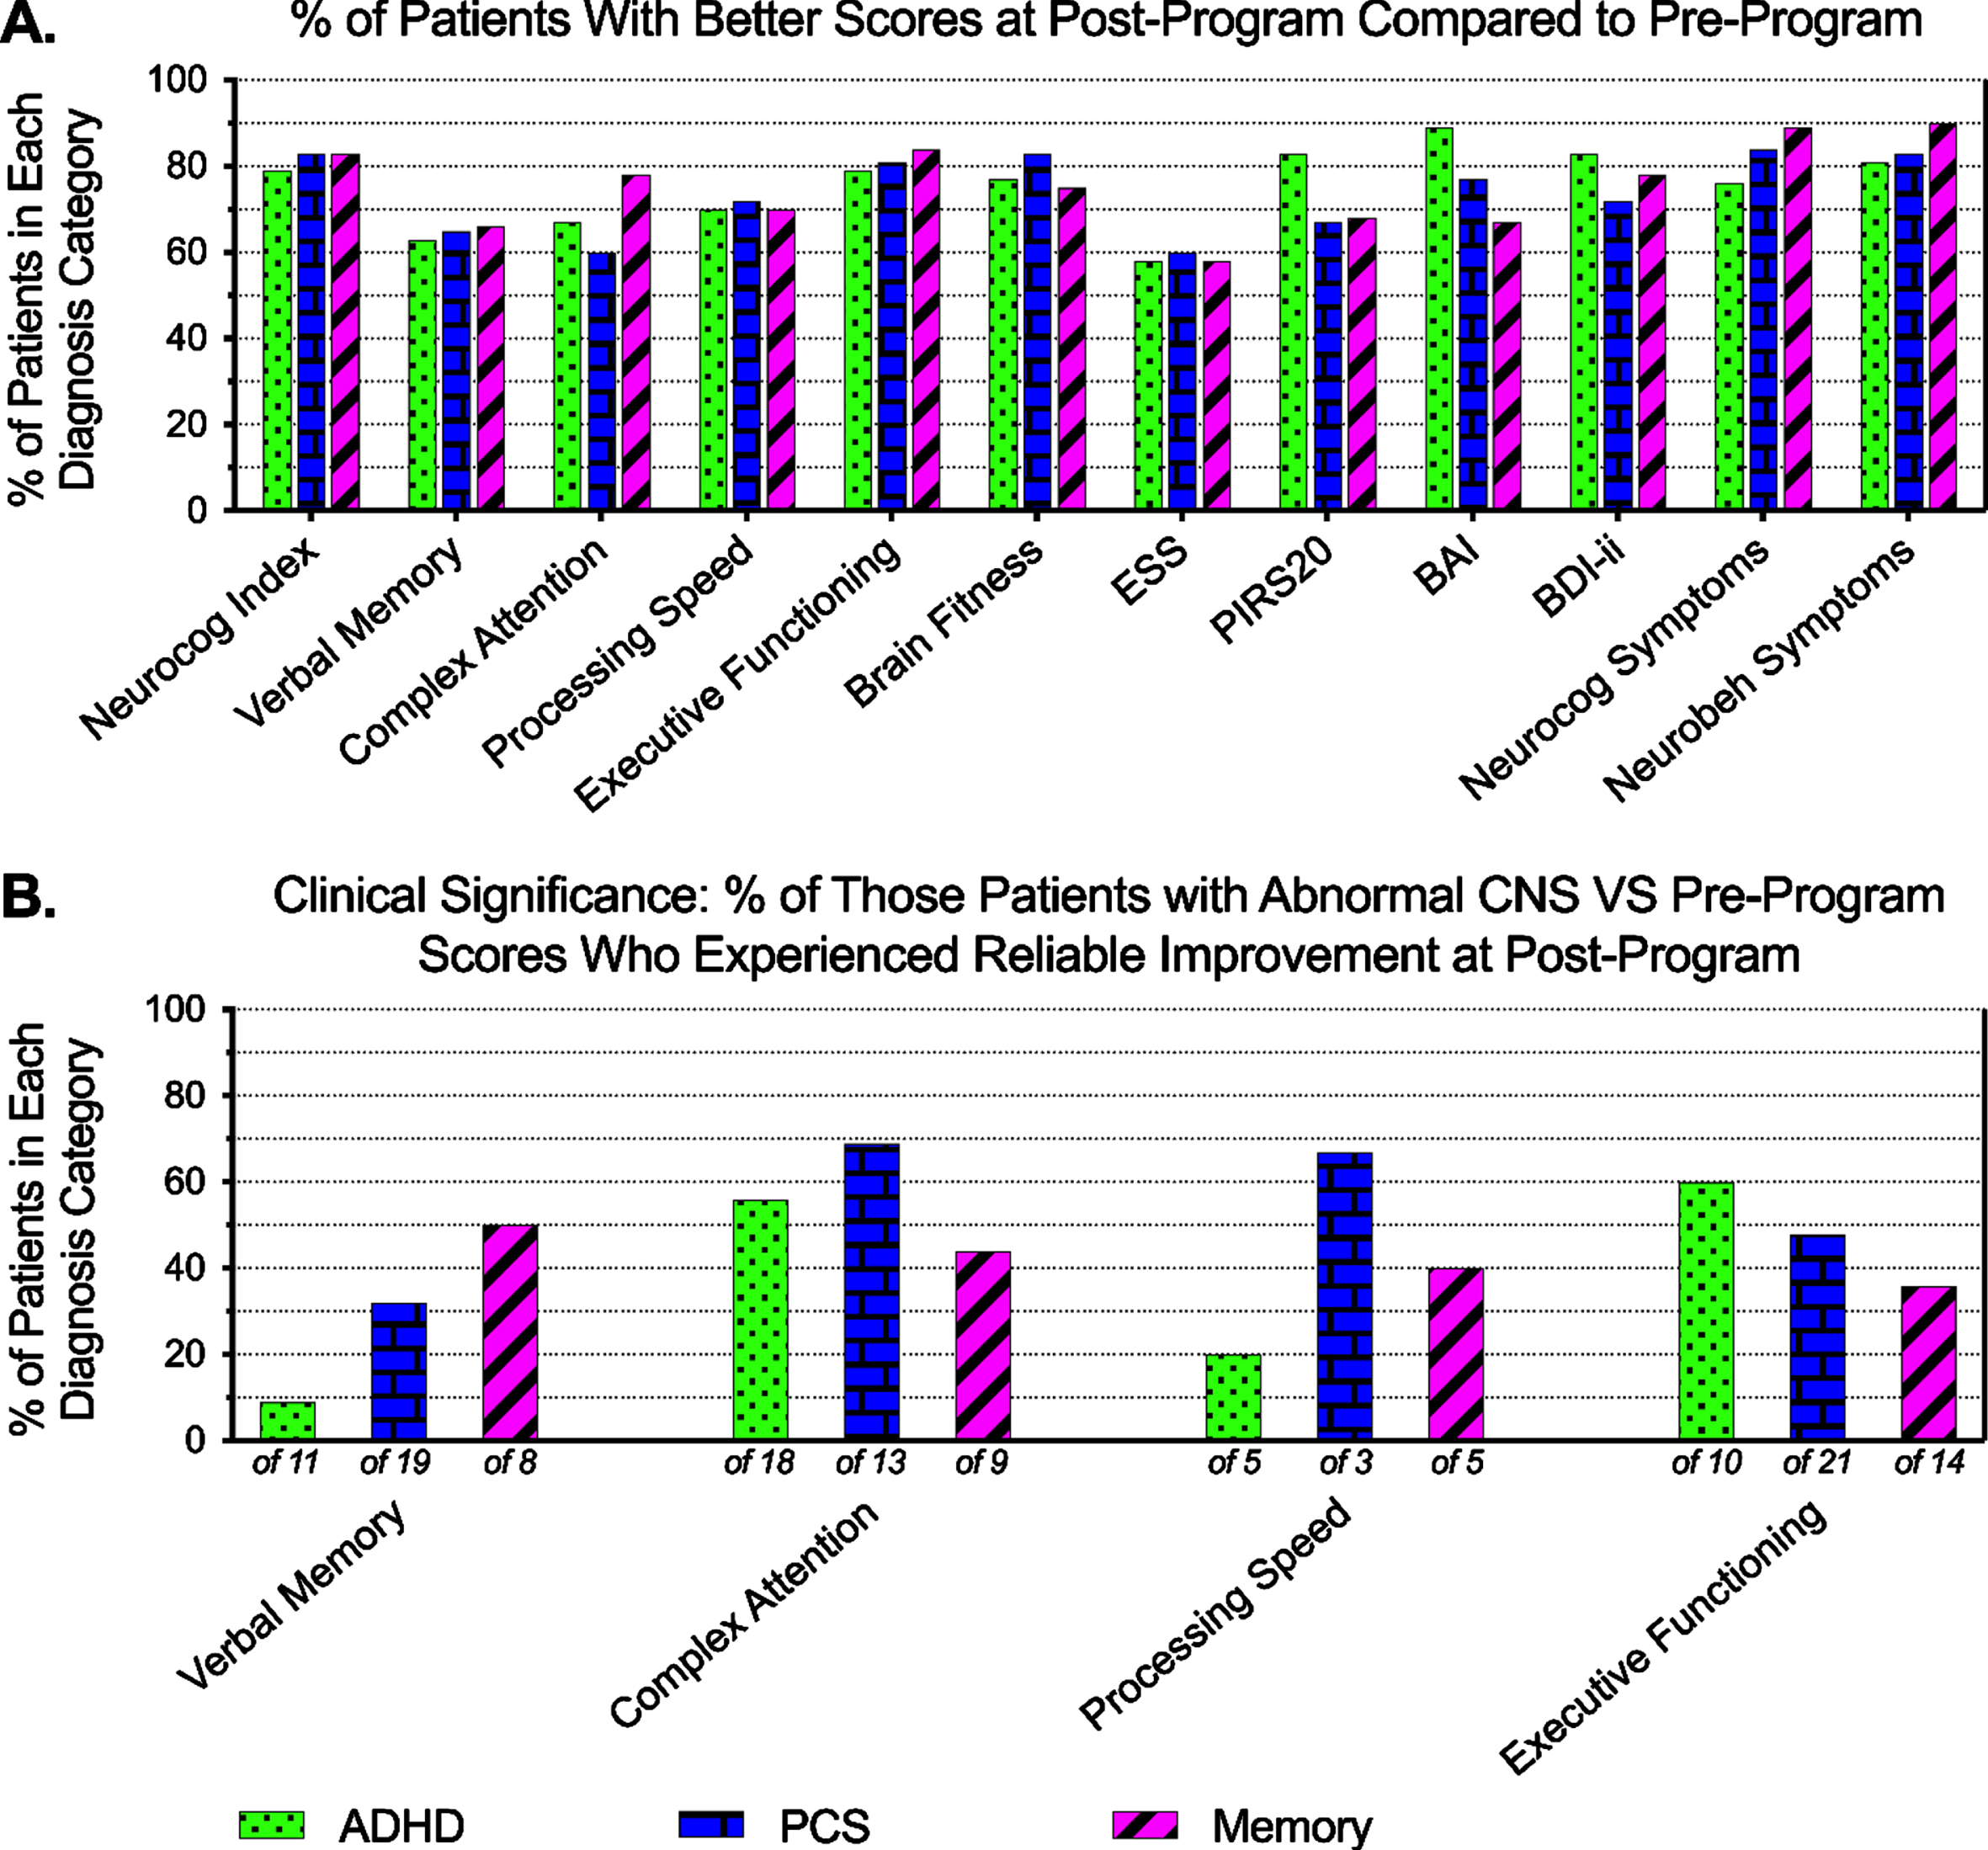 Score changes by diagnosis category. A) Percent of patients in the ADHD, PCS, or memory loss groups whose post-program scores were “better” (in the direction of improvement according to each specific test) than their pre-program test scores. B) Percent of patients who scored less than 70 on their baseline test who improved by at least the RCI. These patients can be considered to have experienced reliable change of clinical importance. Below each bar, the number of patients in that diagnosis category who scored below 70 on the pre-program test is written.